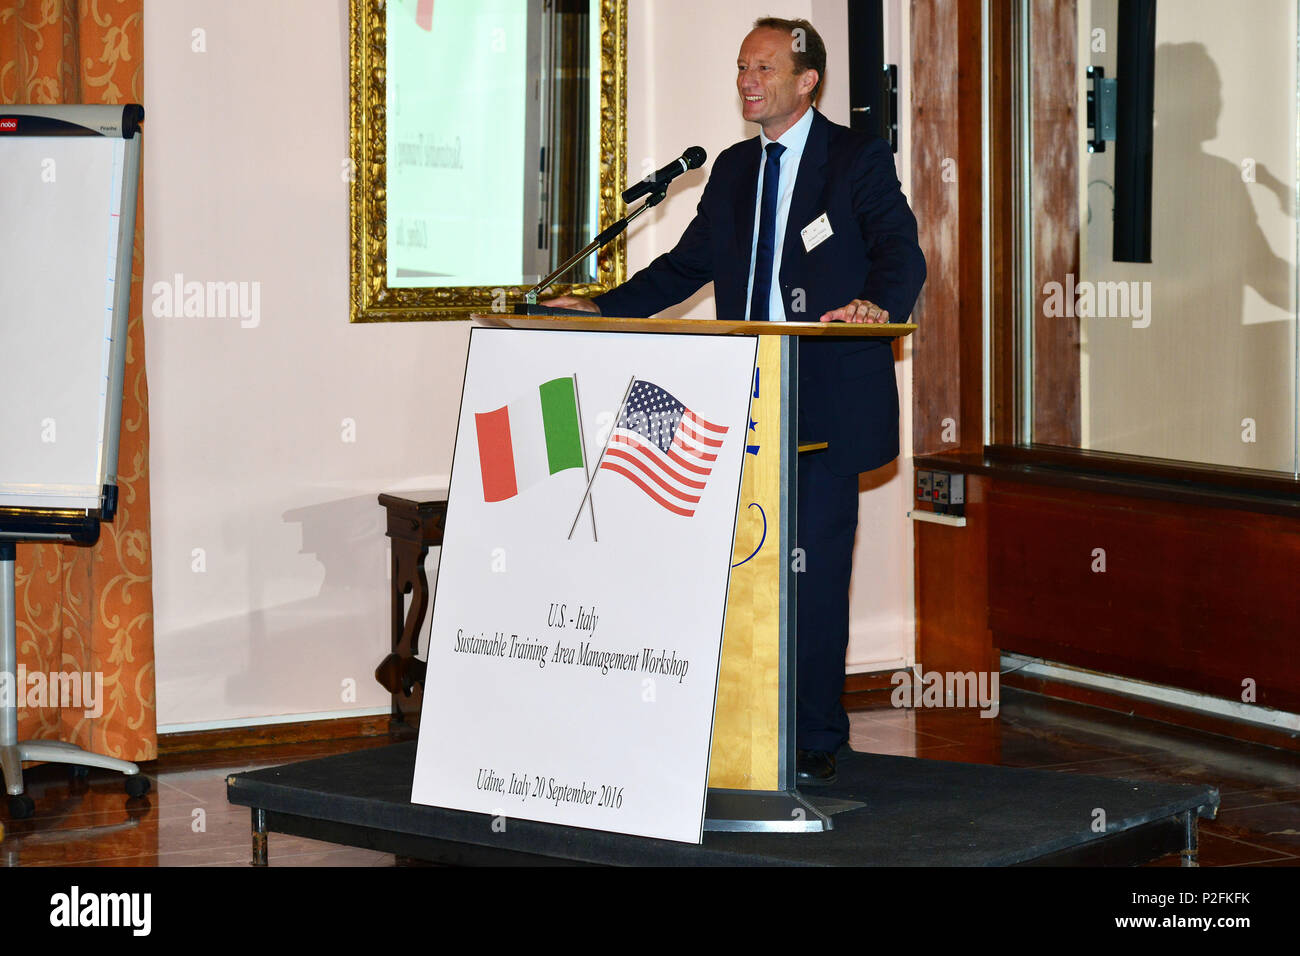 Nate Whelan , U.S. Army Europe Integrated Training Area Management (ITAM) Program Manager, Training Support Activity Europe, 7th Army Training Command, addresses members of United States Army, the Italian Army, Italian authorities and Italian Civilians from 12th Infrastructure Command, on Sustainable Training Area Management Programs, in Udine, Italy, 20 Sept. 2016. (U.S. Army photo by Visual Information Specialist Paolo Bovo/Released Stock Photo